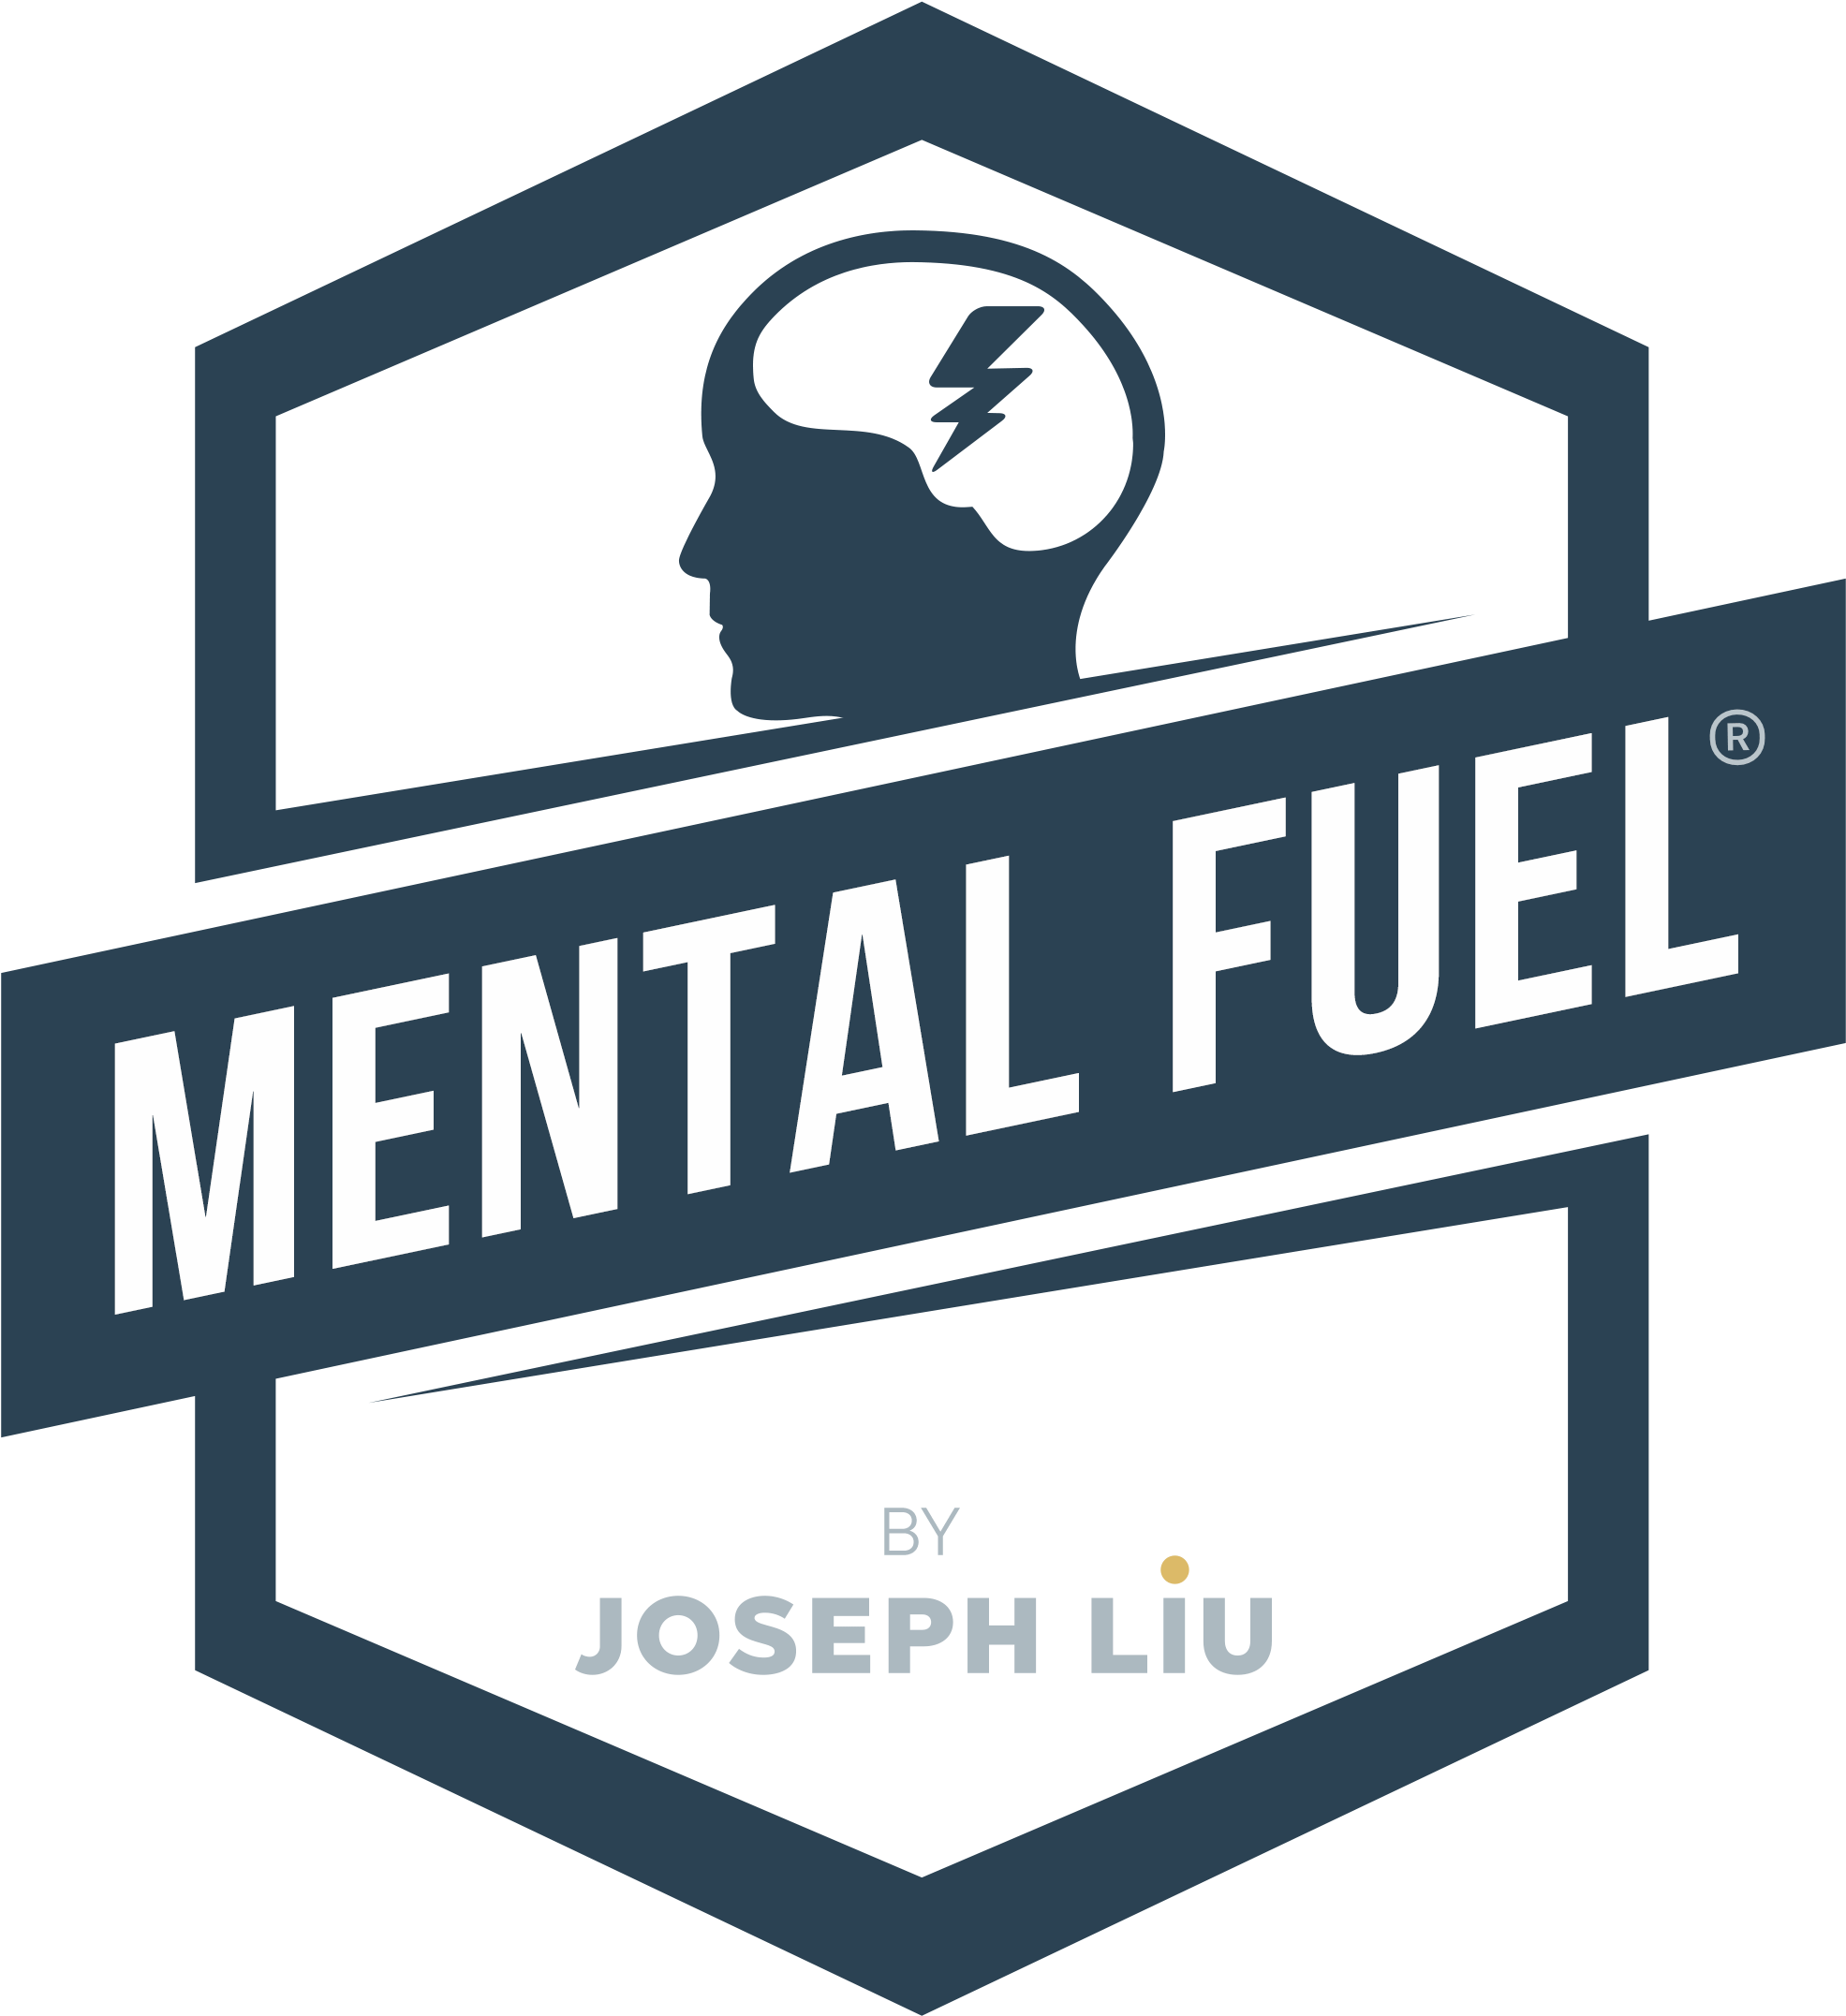 This Episode's Mental Fuel Segment, I Talked About - Sign (2180x2180)